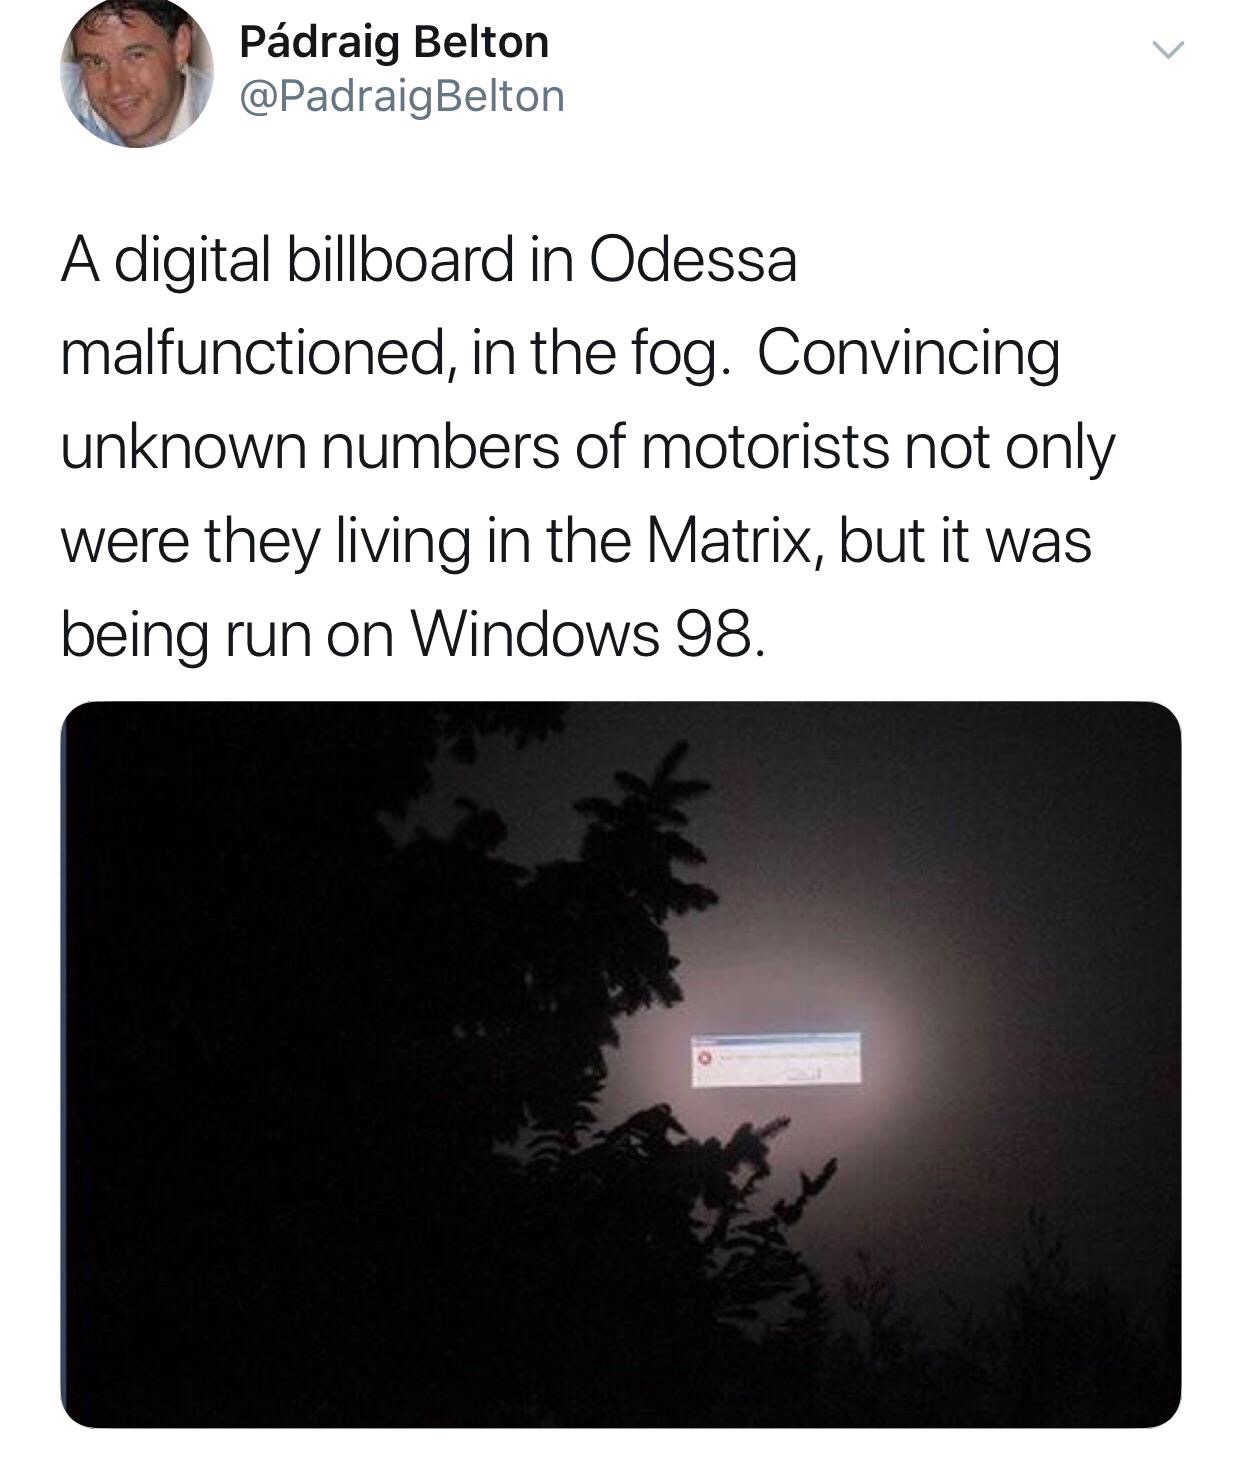 Pdraig Belton Belton A digital billboard in Odessa malfunctioned, in the fog. Convincing unknown numbers of motorists not only were they living in the Matrix, but it was being run on Windows 98.